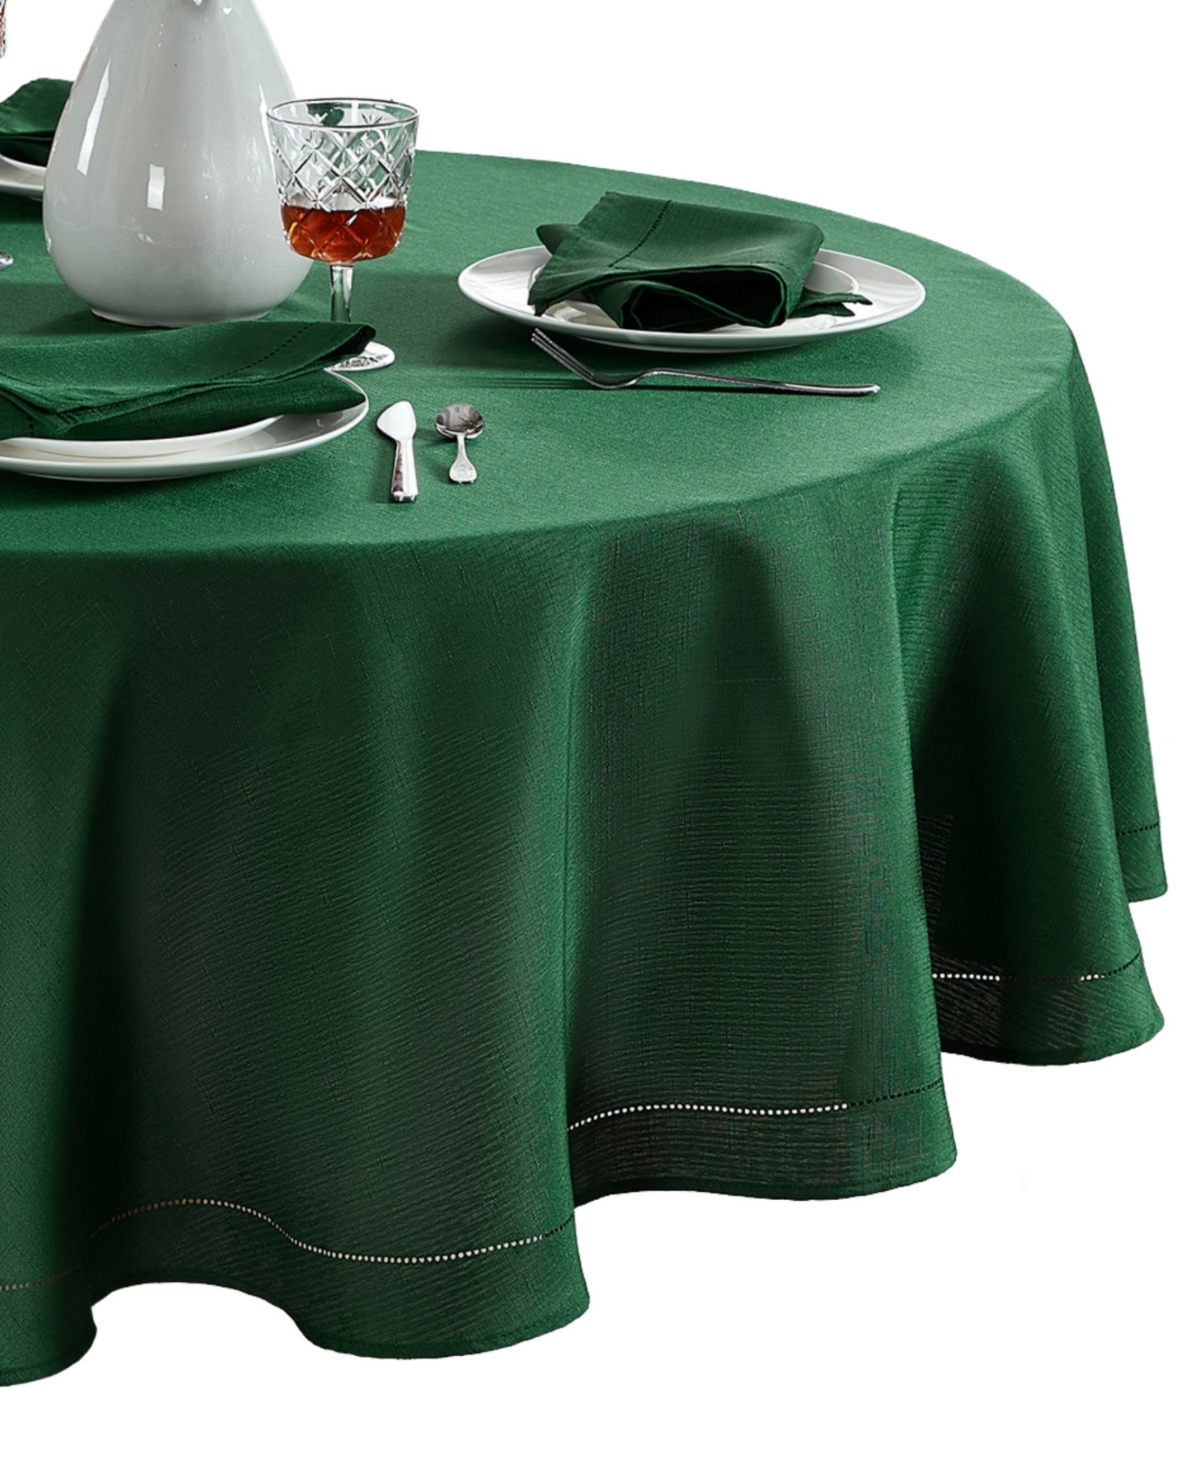 Elrene Alison Eyelet Punched Border Fabric Tablecloth, 70" Round In Forest